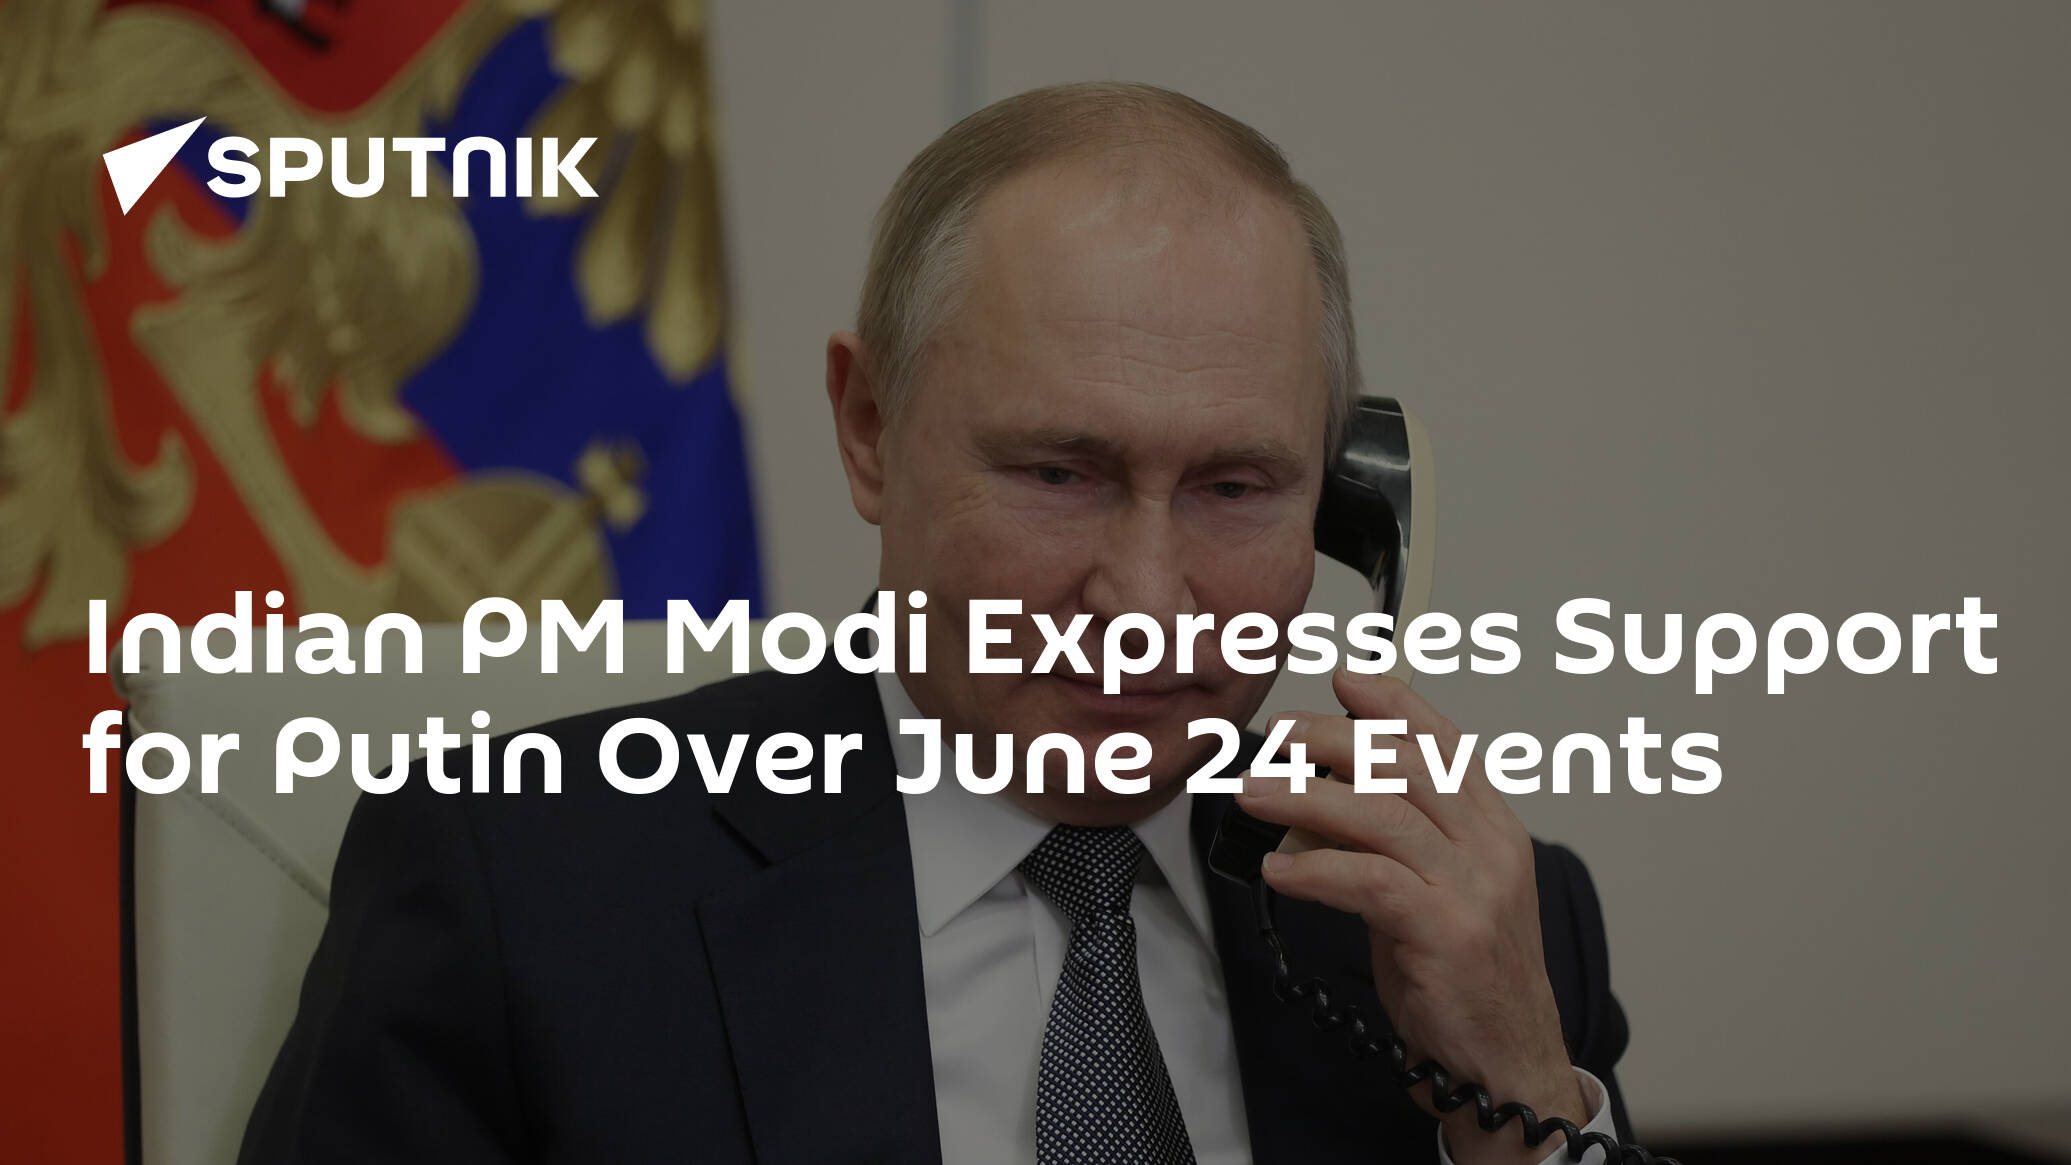 Indian PM Modi Expresses Support for Putin Over June 24 Events